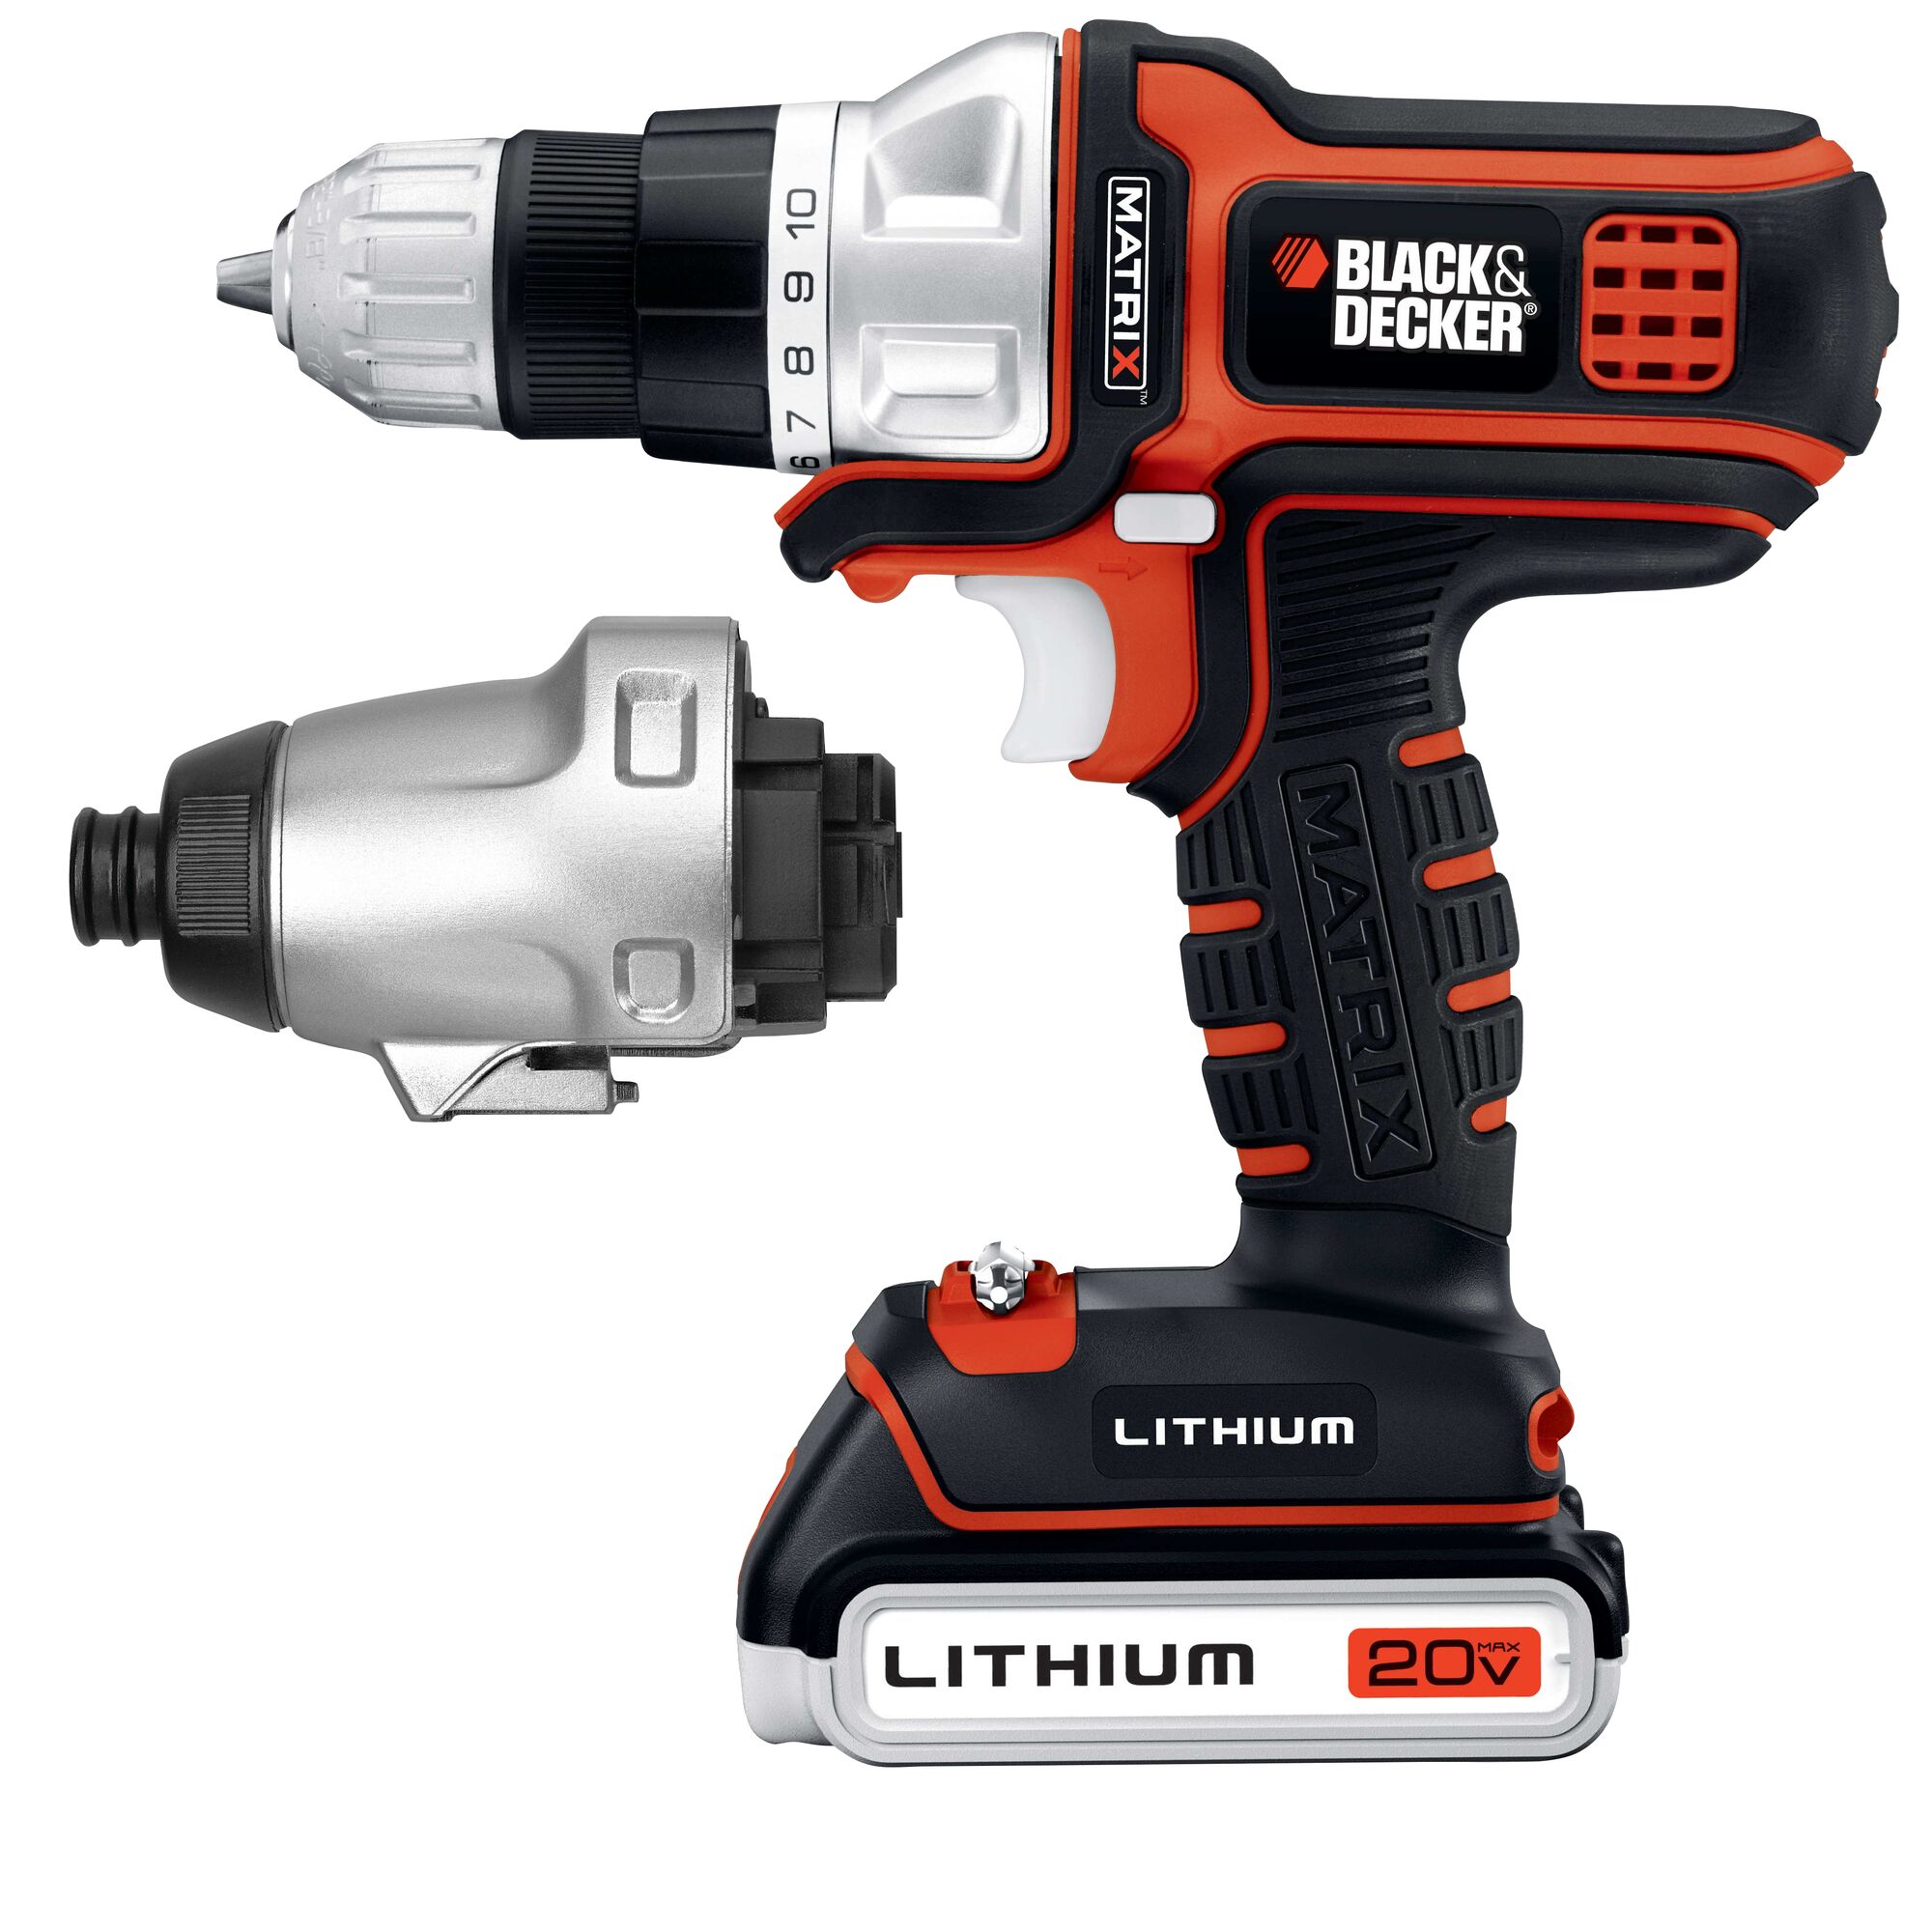 Lithium Ion Drill and Driver plus Impact Driver Combo Kit.